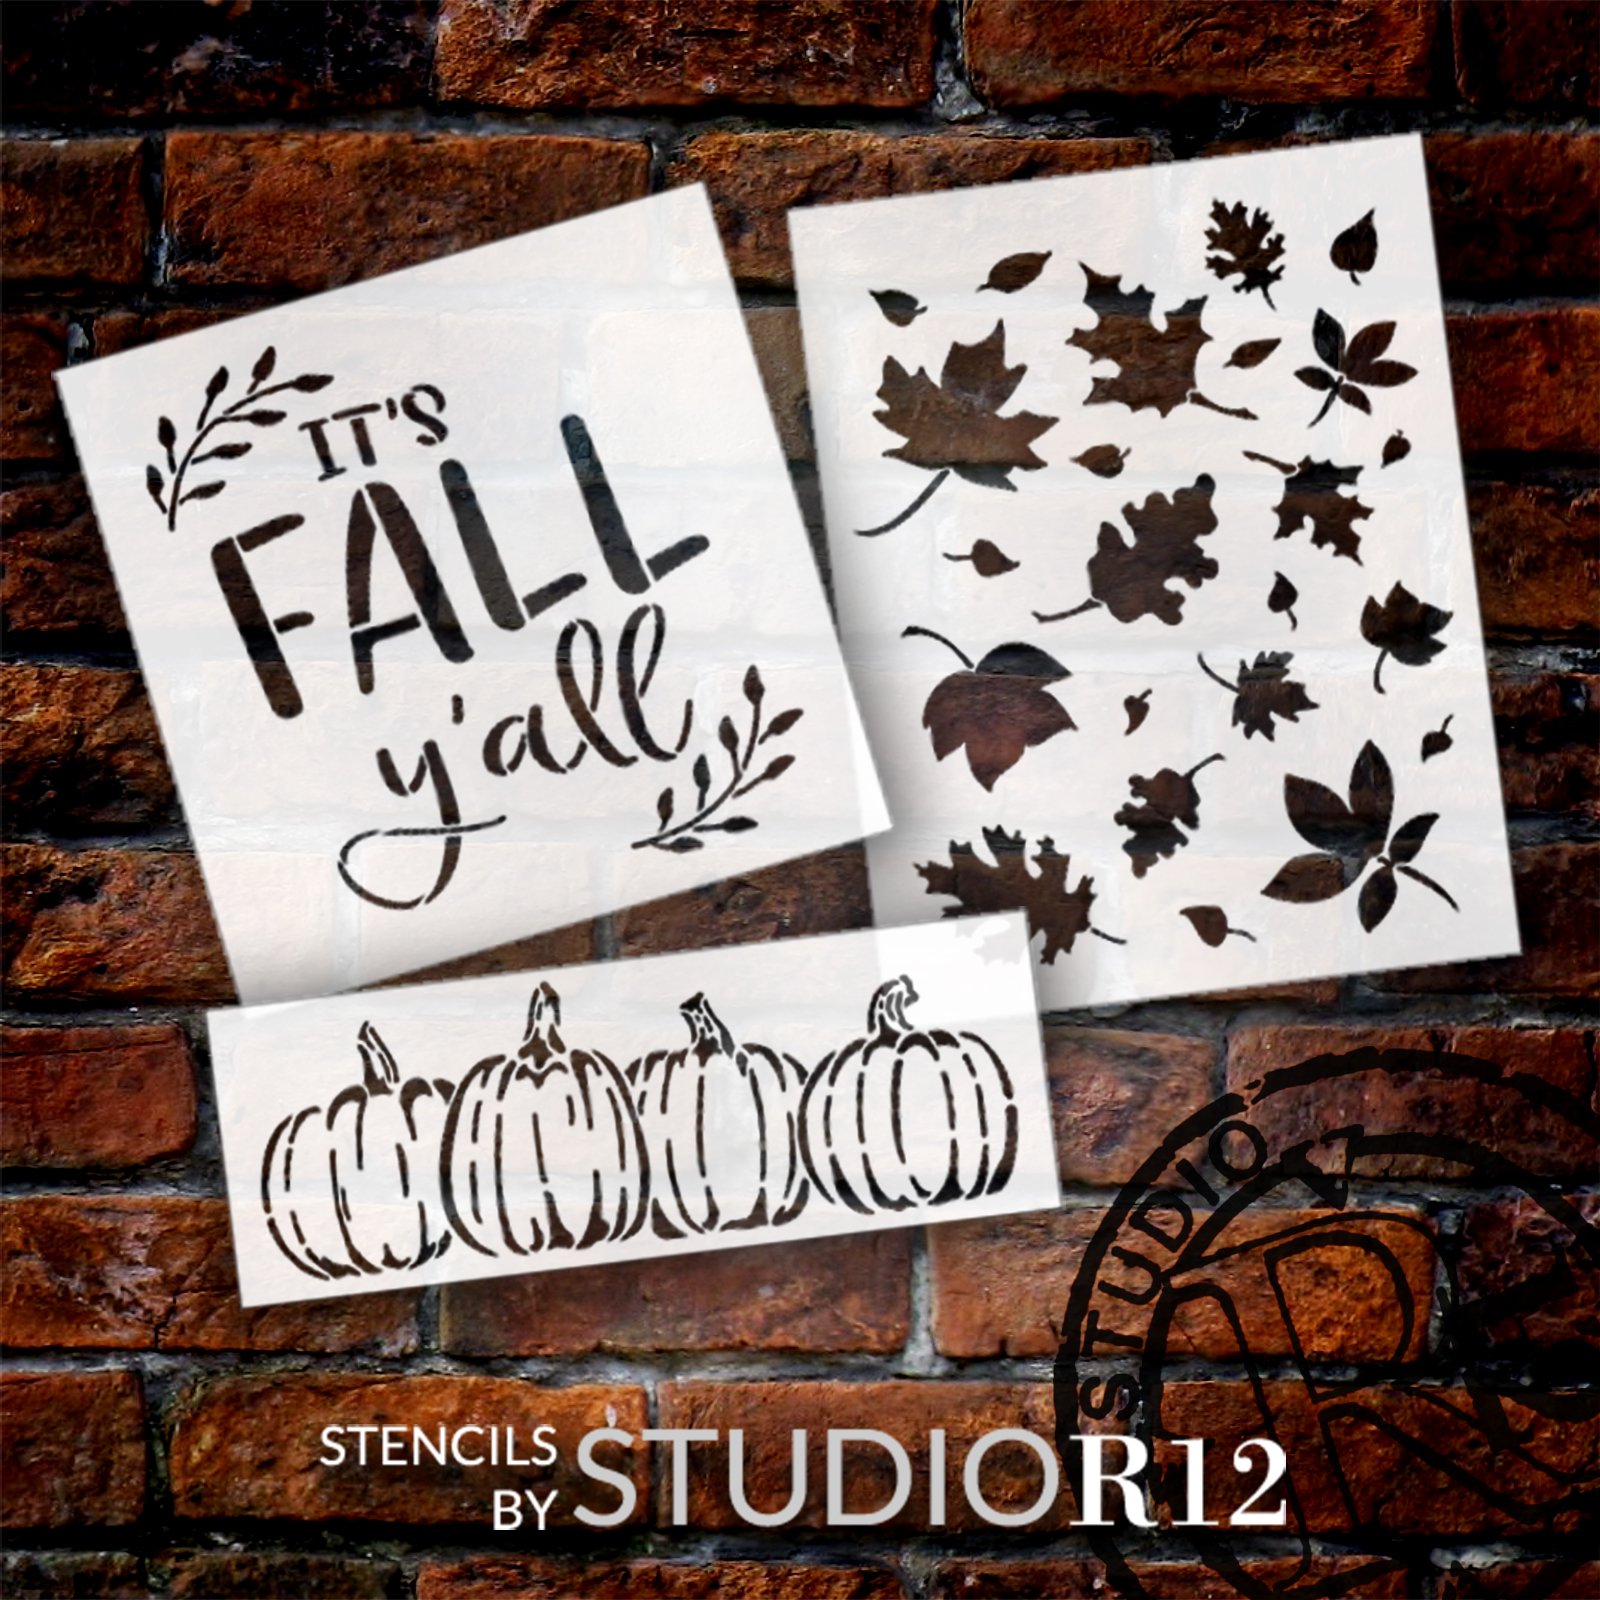 It's Fall Y'all with Pumpkins & Leaves Stencil Set by StudioR12 - Select Size - USA Made - DIY Fall Wreath Wall Decor | Craft & Paint Autumn Wood Signs